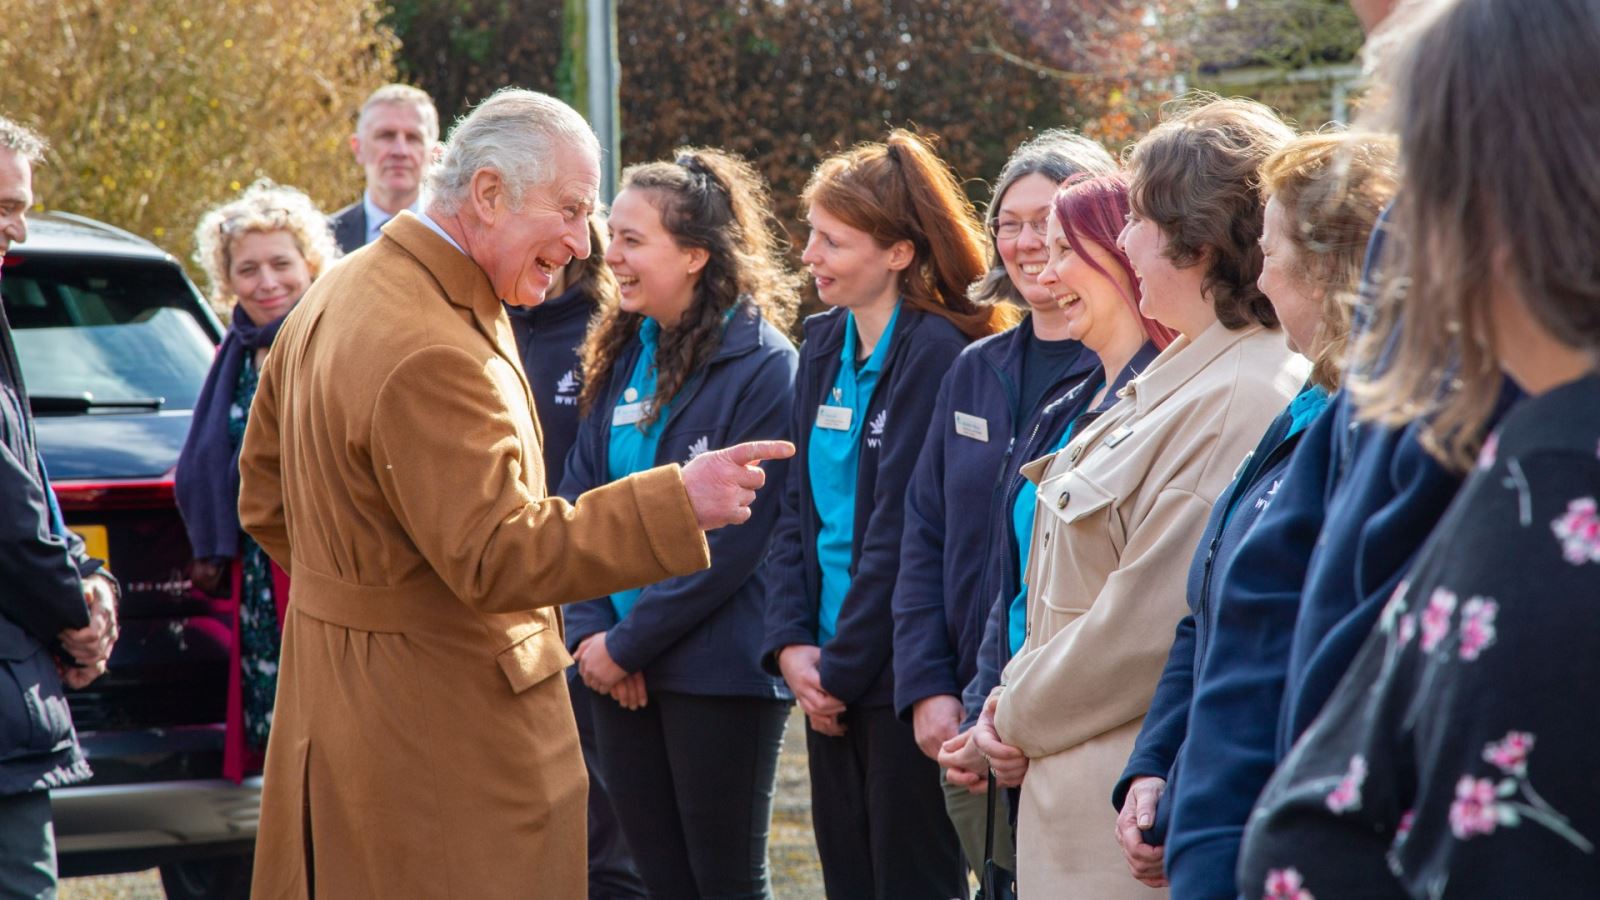 WWT Slimbridge in Gloucestershire welcomes HRH The Prince of Wales